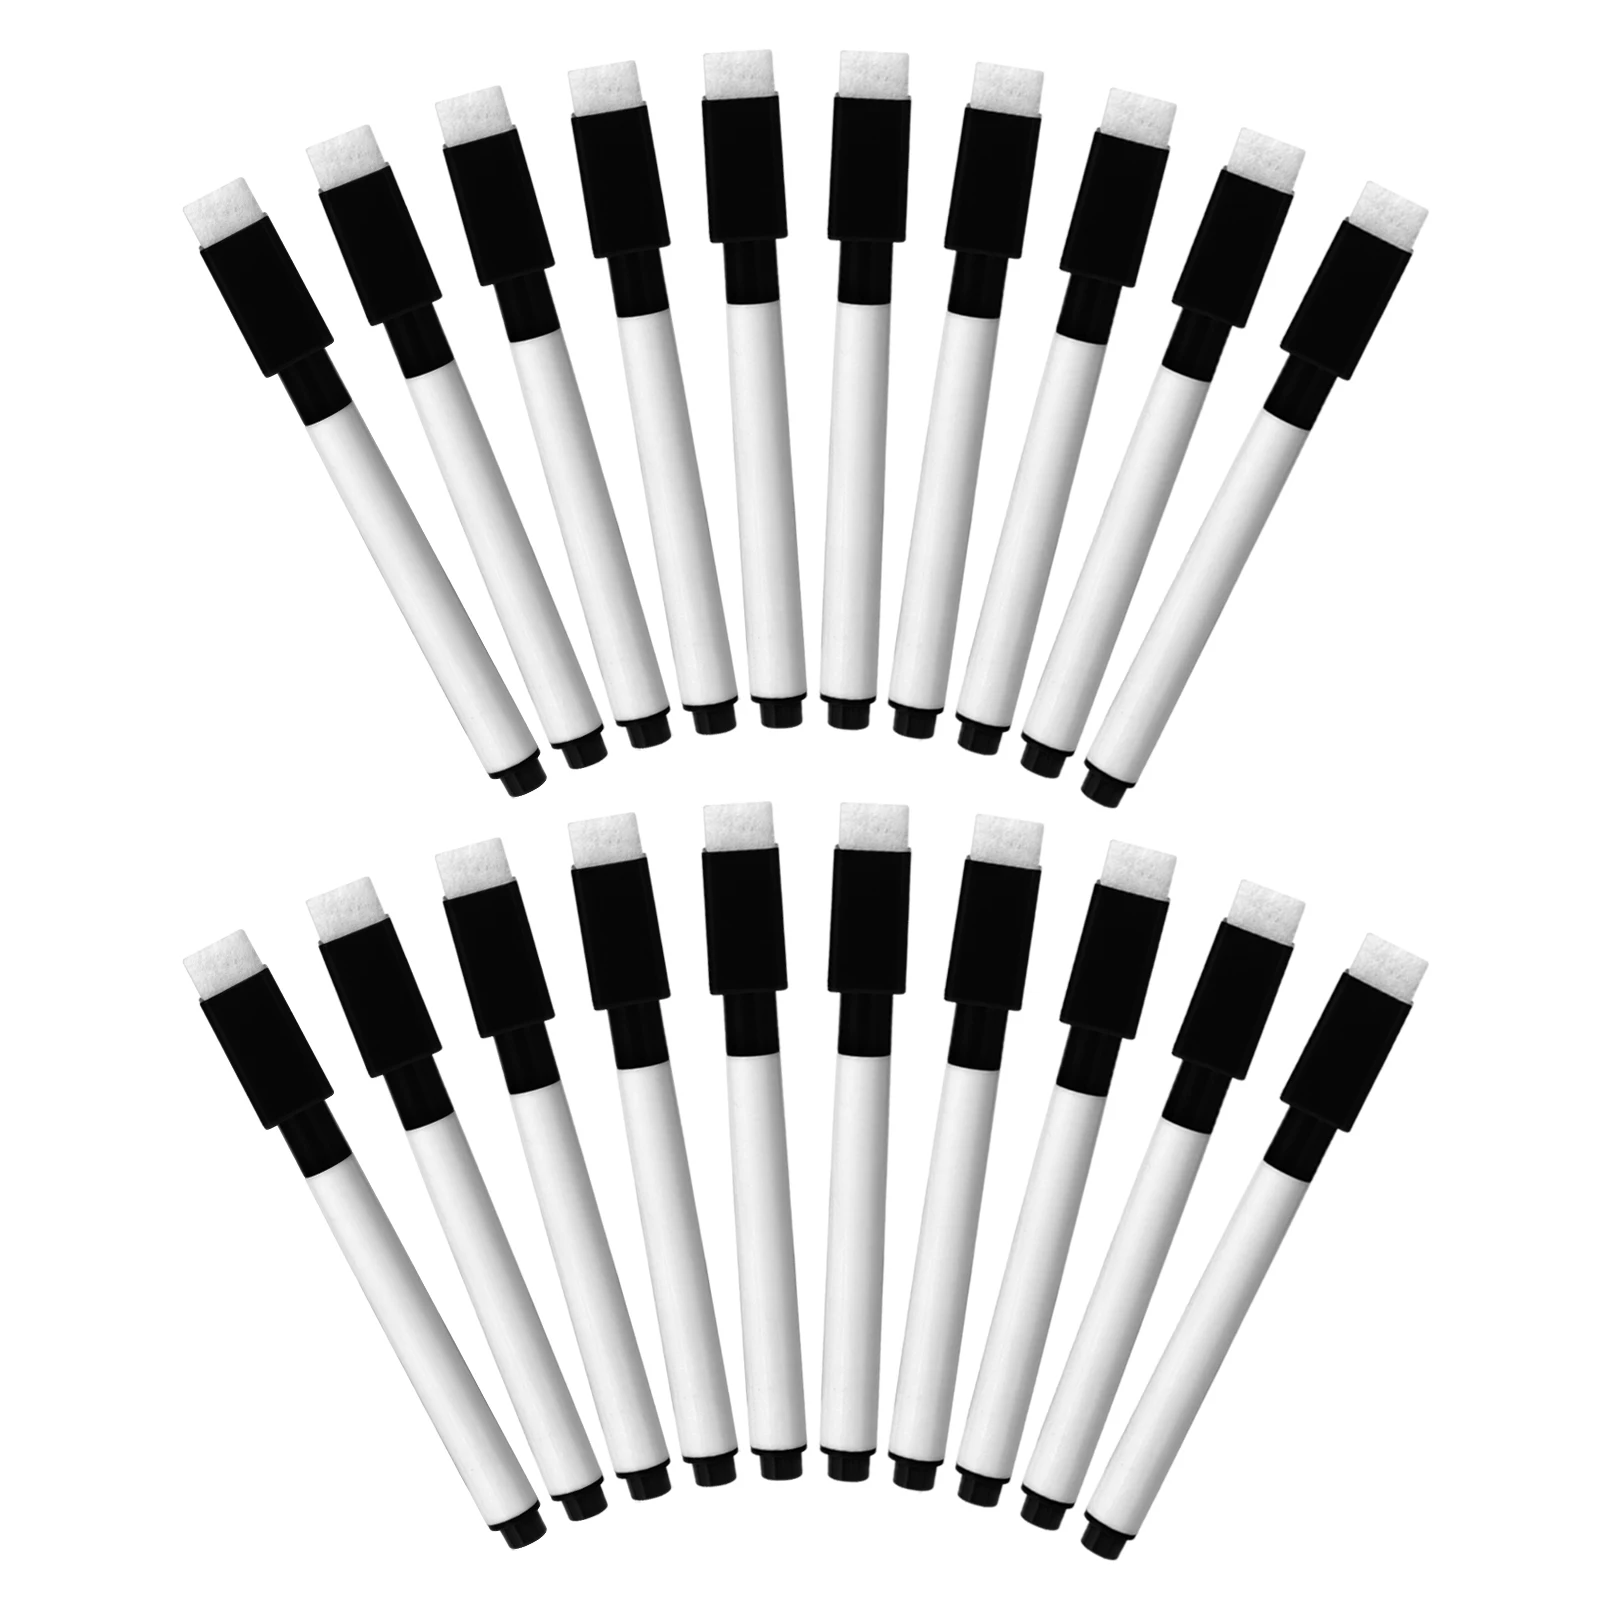 

20pcs With Eraser Dry Wipe School Classroom Stationery Drawing Fine Tip Marker Whiteboard Pen Student Black Magnetic Office Gift